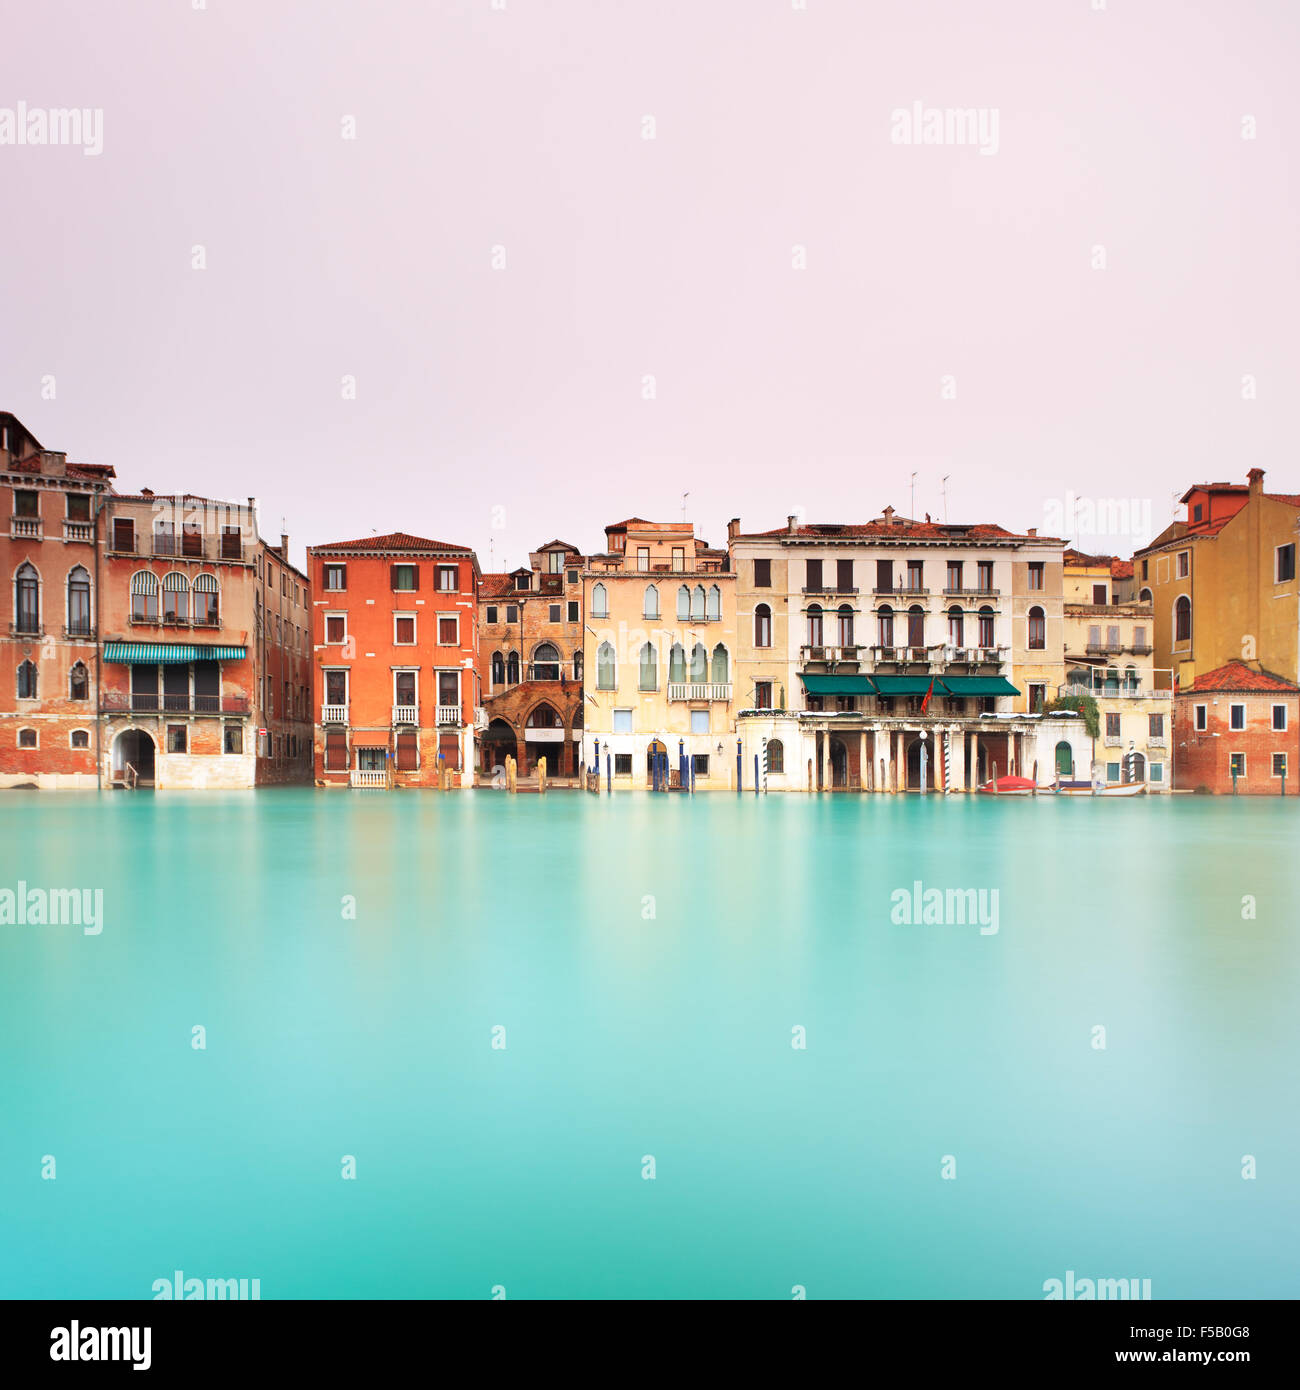 Famous Grand Canal landmark in Venice in a long exposure photography. Grand Canal is the largest and important water canal in Ve Stock Photo